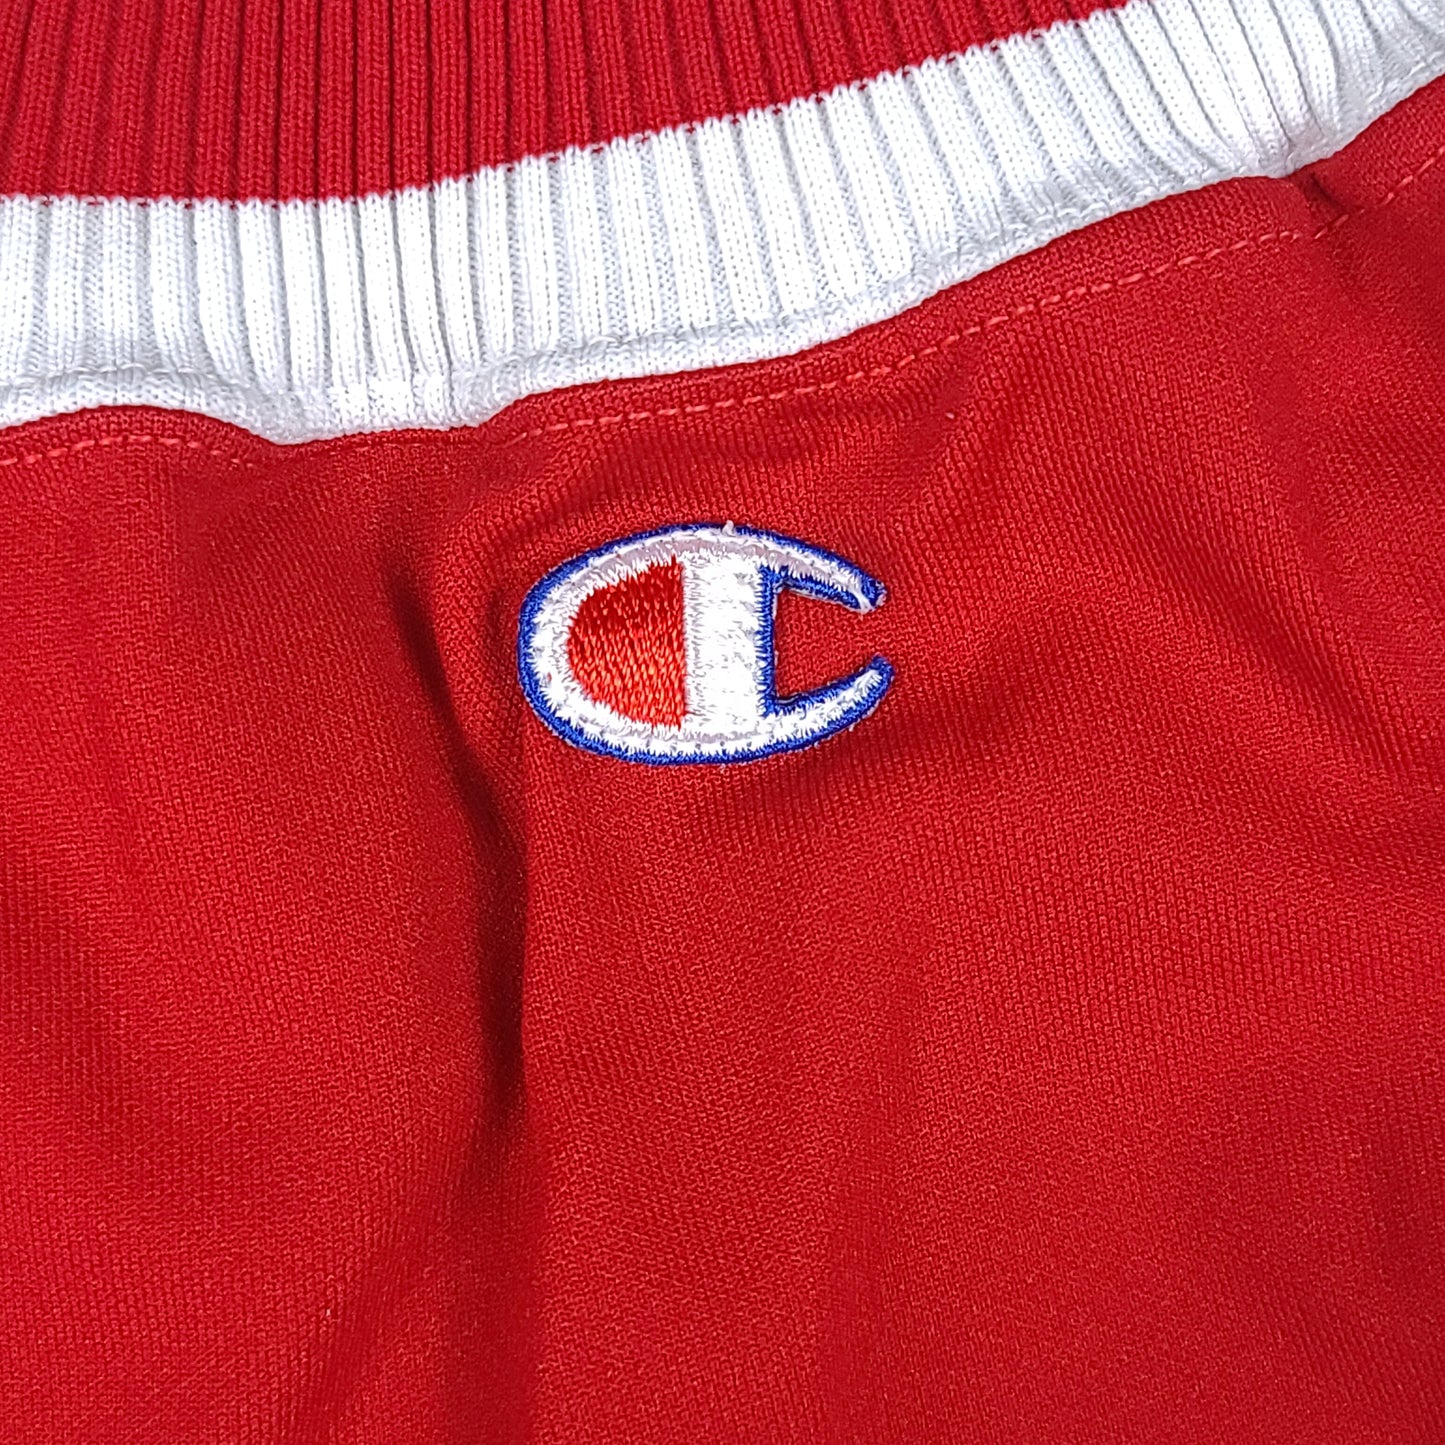 Vintage Lady Champion Red Athletic Shorts